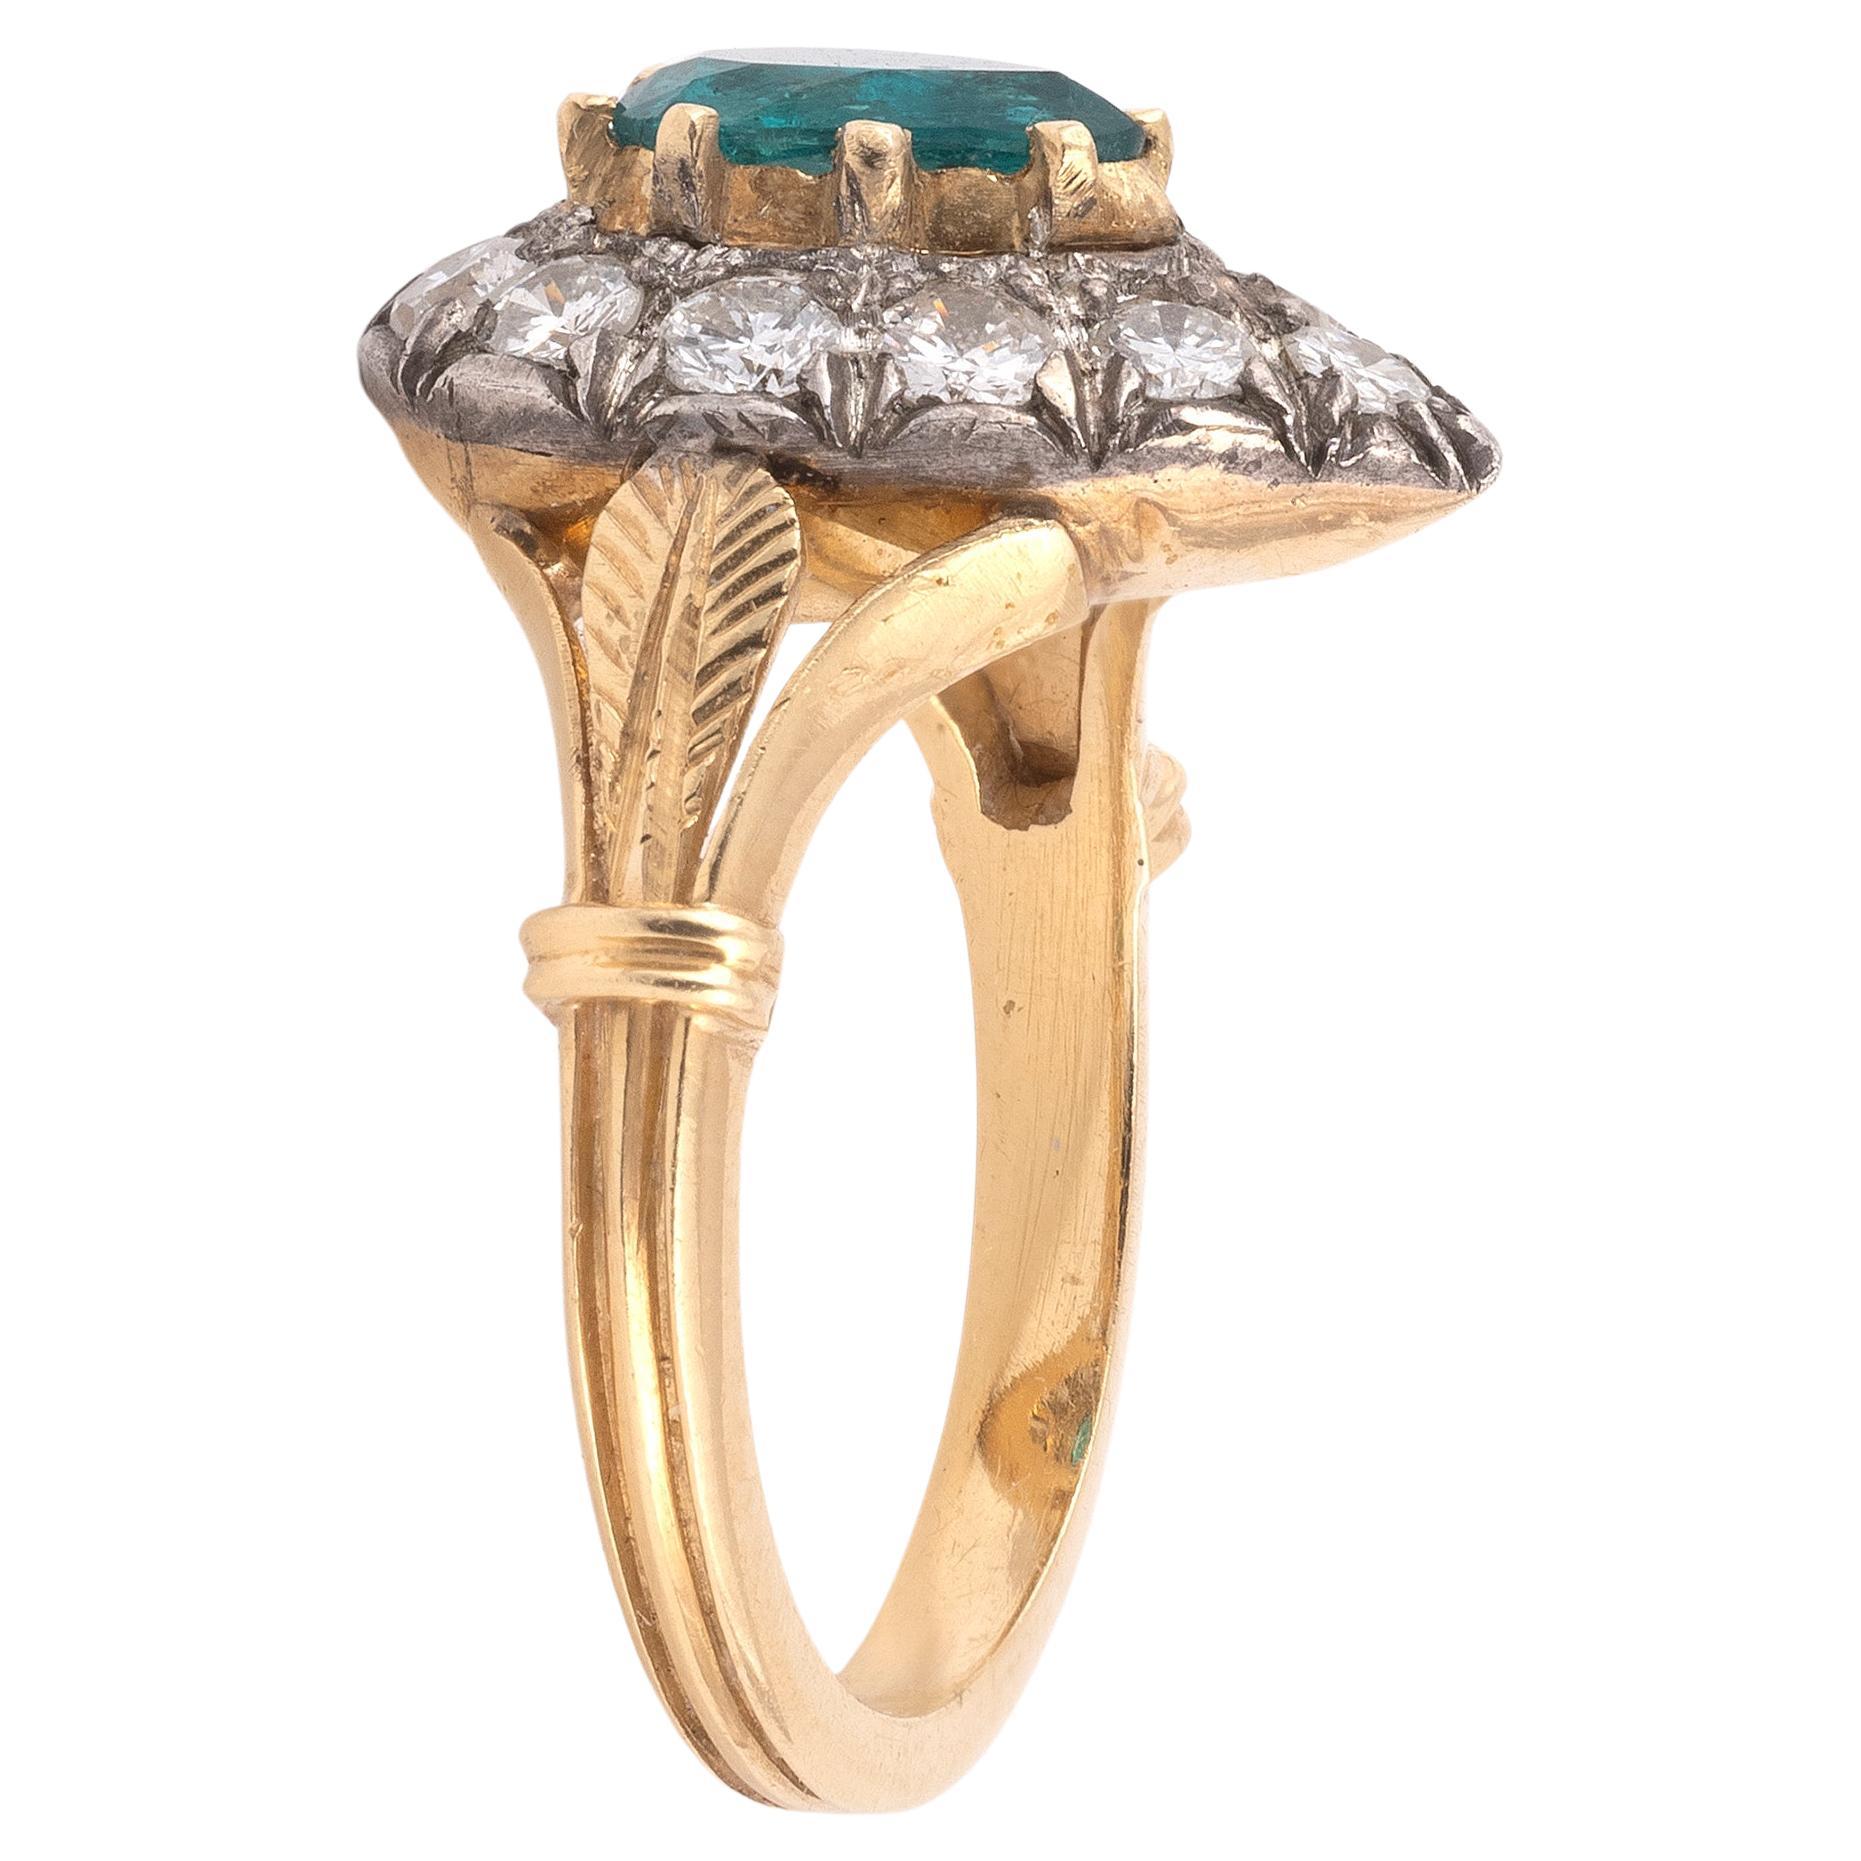 An antique 1.65ct Colombian, untreated emerald and diamond cluster ring, the central pear shaped emerald with an old mine cut diamond surround, mounted in silver and gold

Size 7

Weight: 7,54gr.